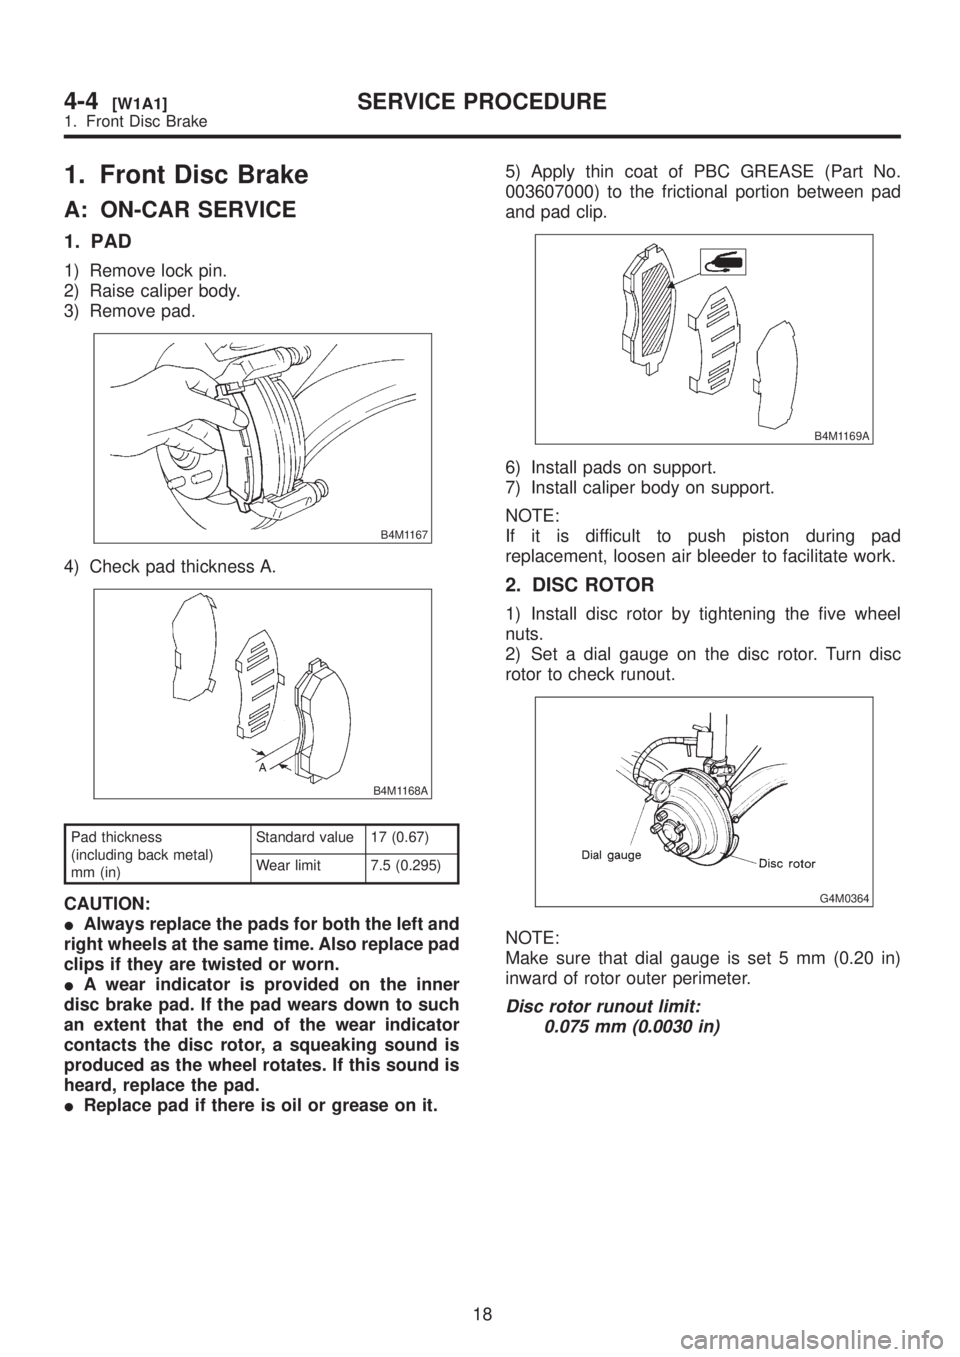 SUBARU LEGACY 1999  Service Repair Manual 1. Front Disc Brake
A: ON-CAR SERVICE
1. PAD
1) Remove lock pin.
2) Raise caliper body.
3) Remove pad.
B4M1167
4) Check pad thickness A.
B4M1168A
Pad thickness
(including back metal)
mm (in)Standard v